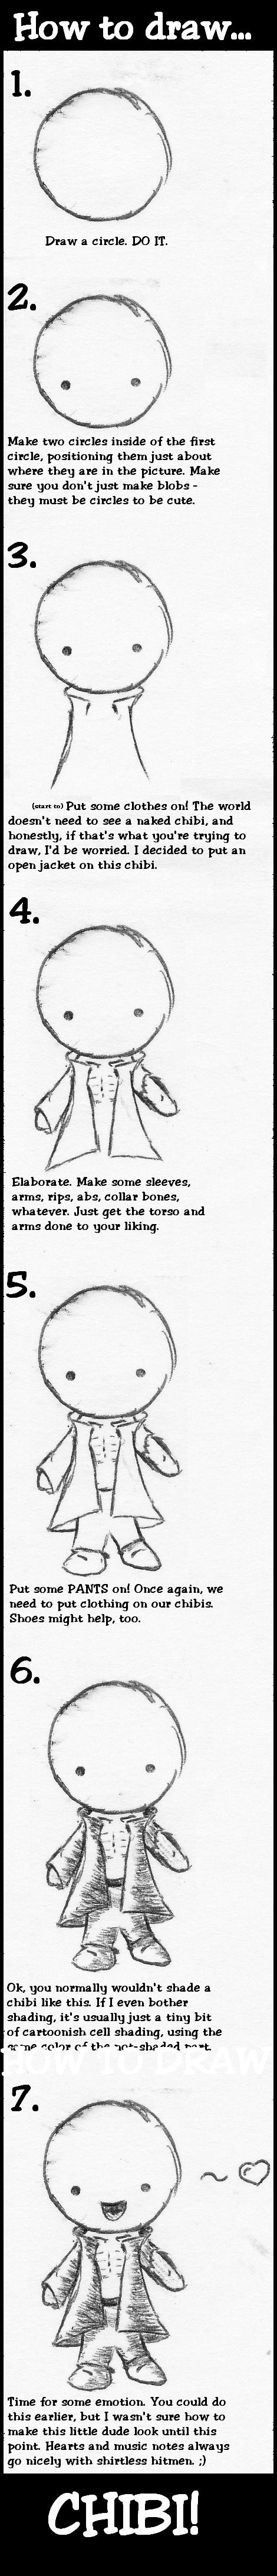 How to draw a chibi